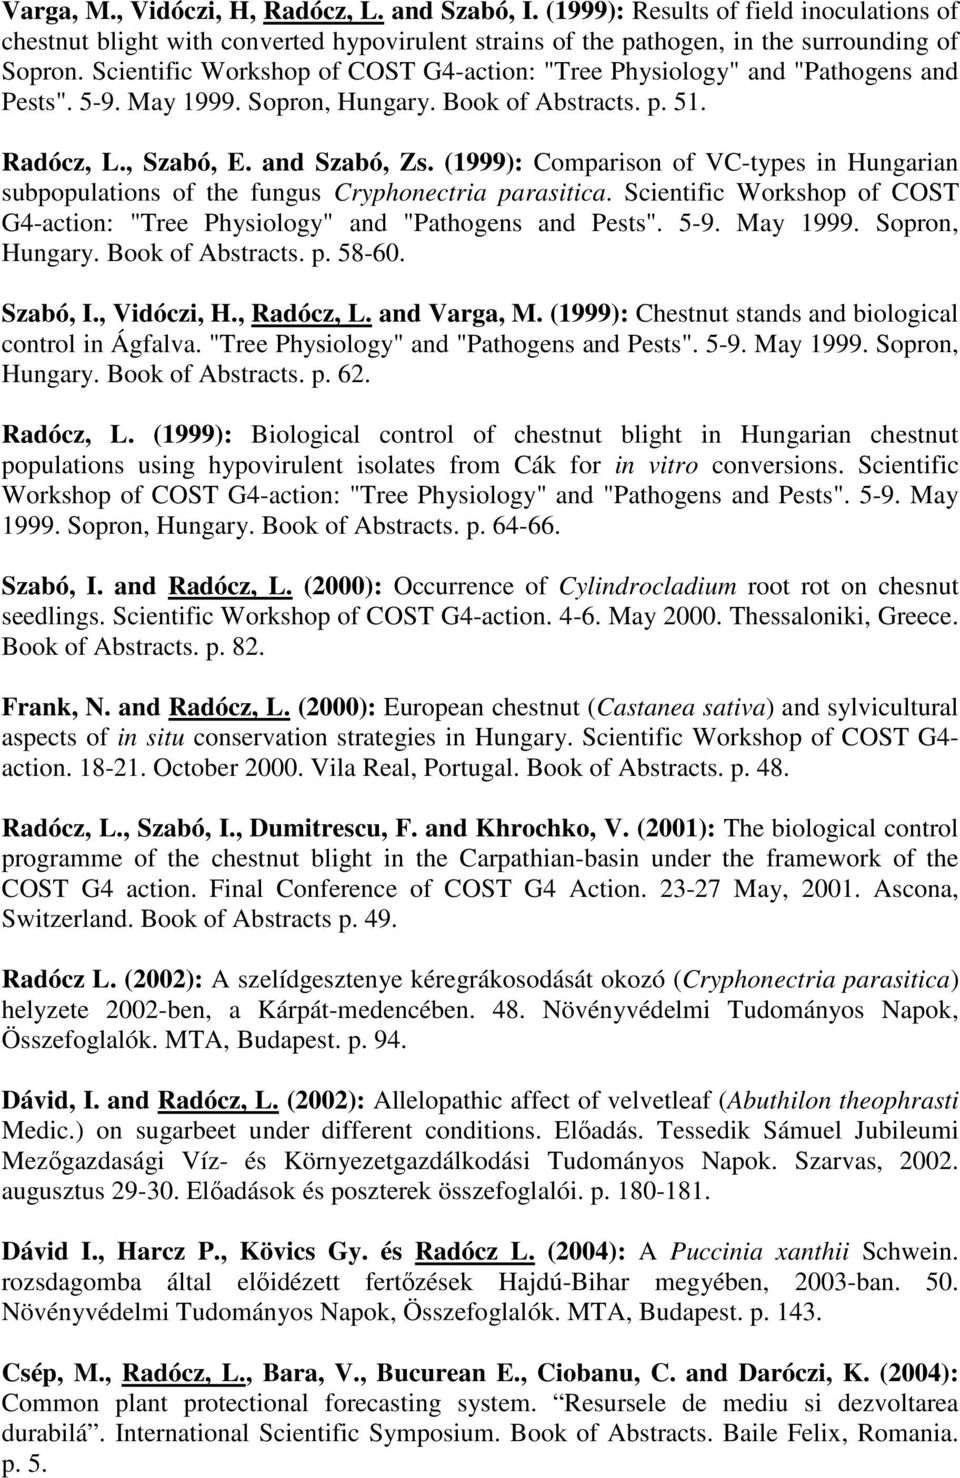 (1999): Comparison of VC-types in Hungarian subpopulations of the fungus Cryphonectria parasitica. Scientific Workshop of COST G4-action: "Tree Physiology" and "Pathogens and Pests". 5-9. May 1999.